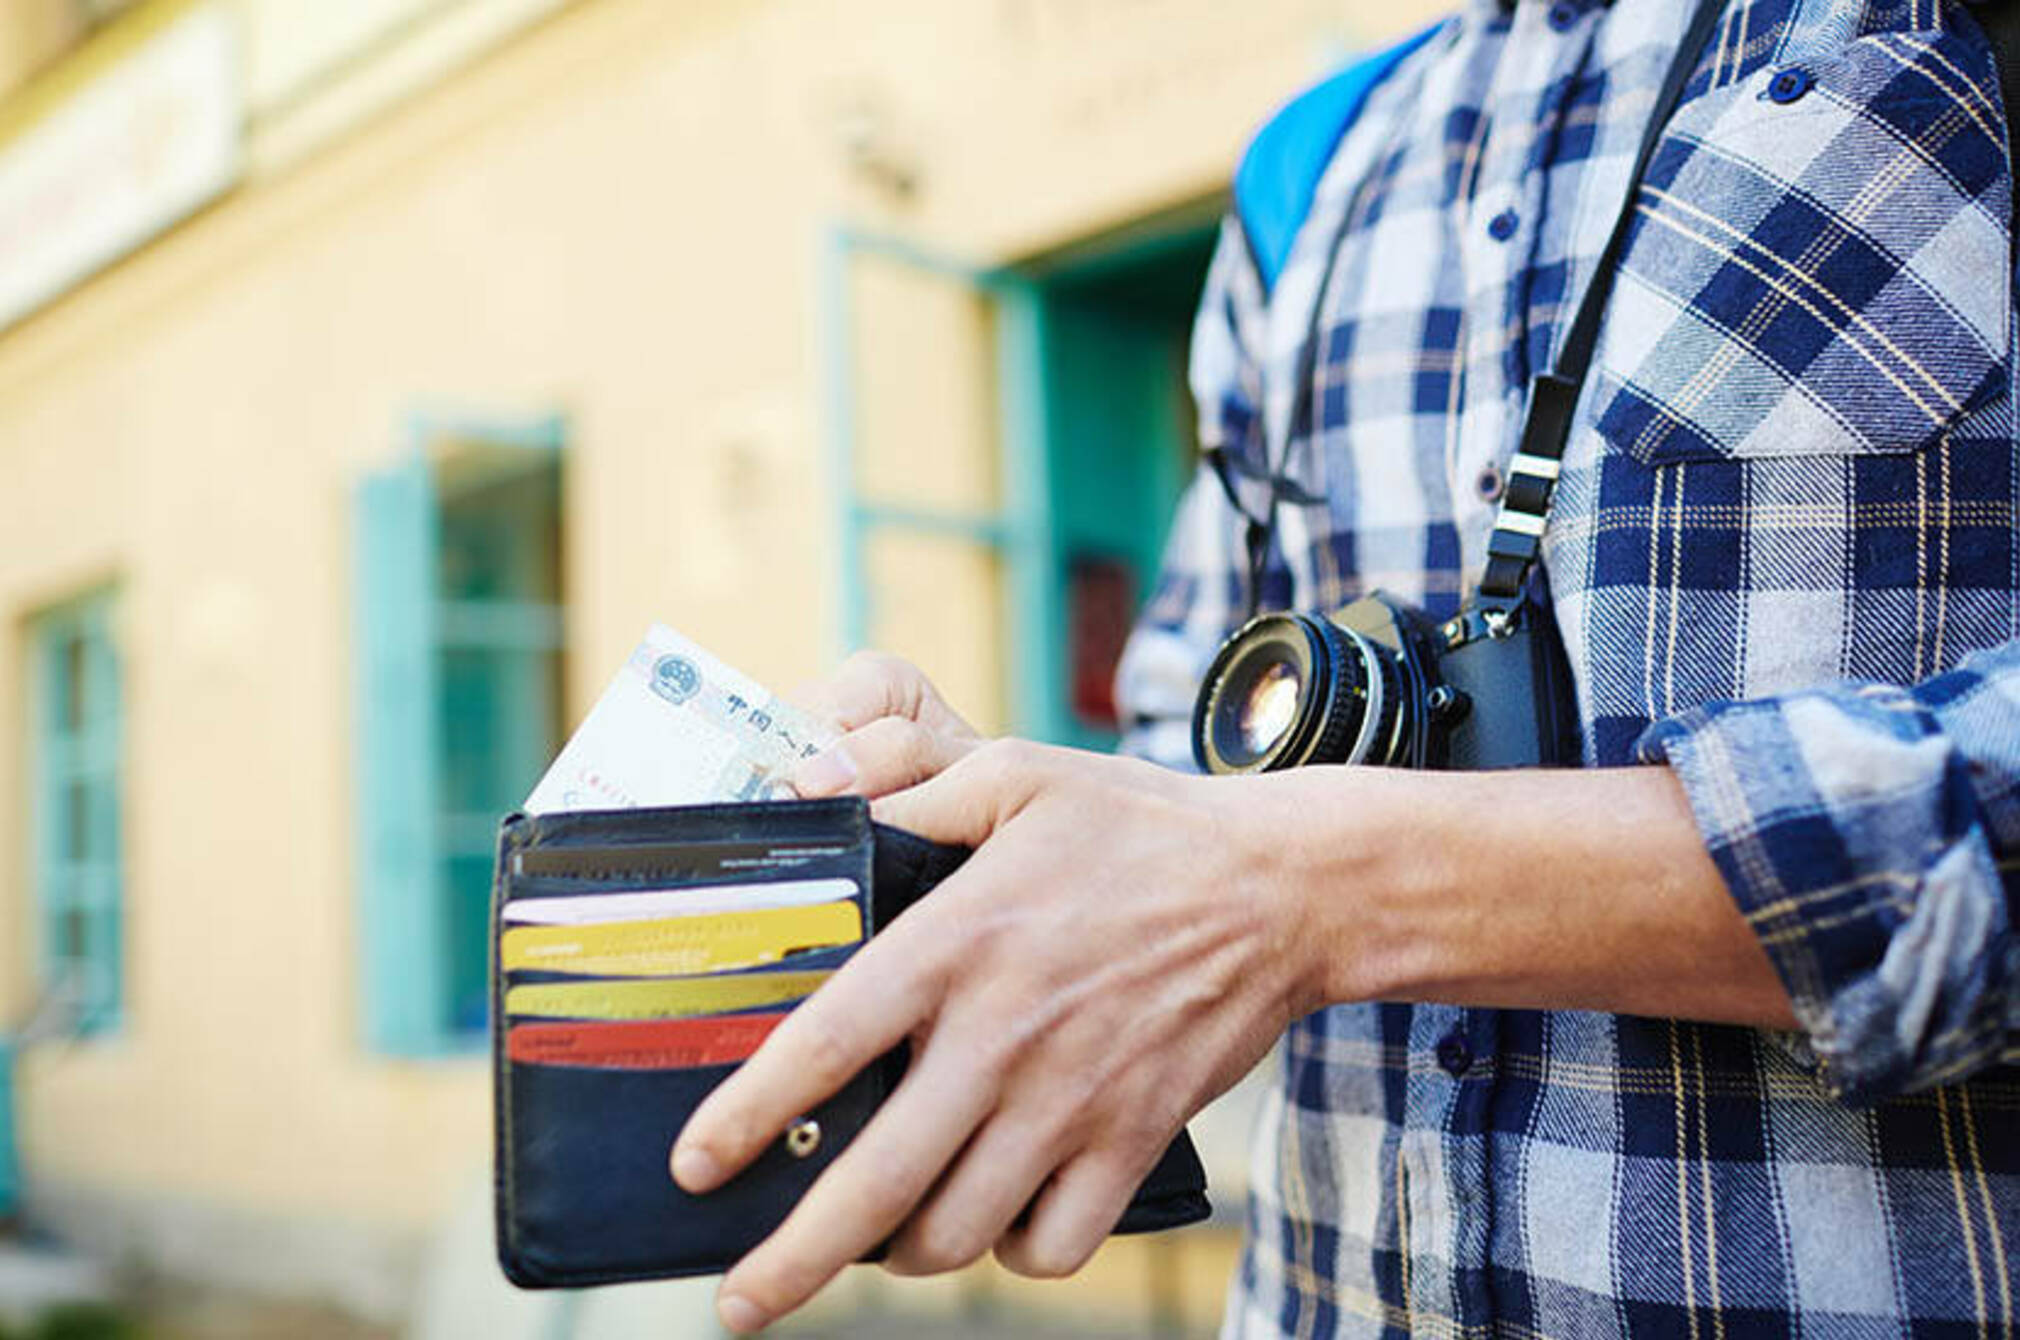 Why You Should Choose Credit Over Cash When Traveling Abroad